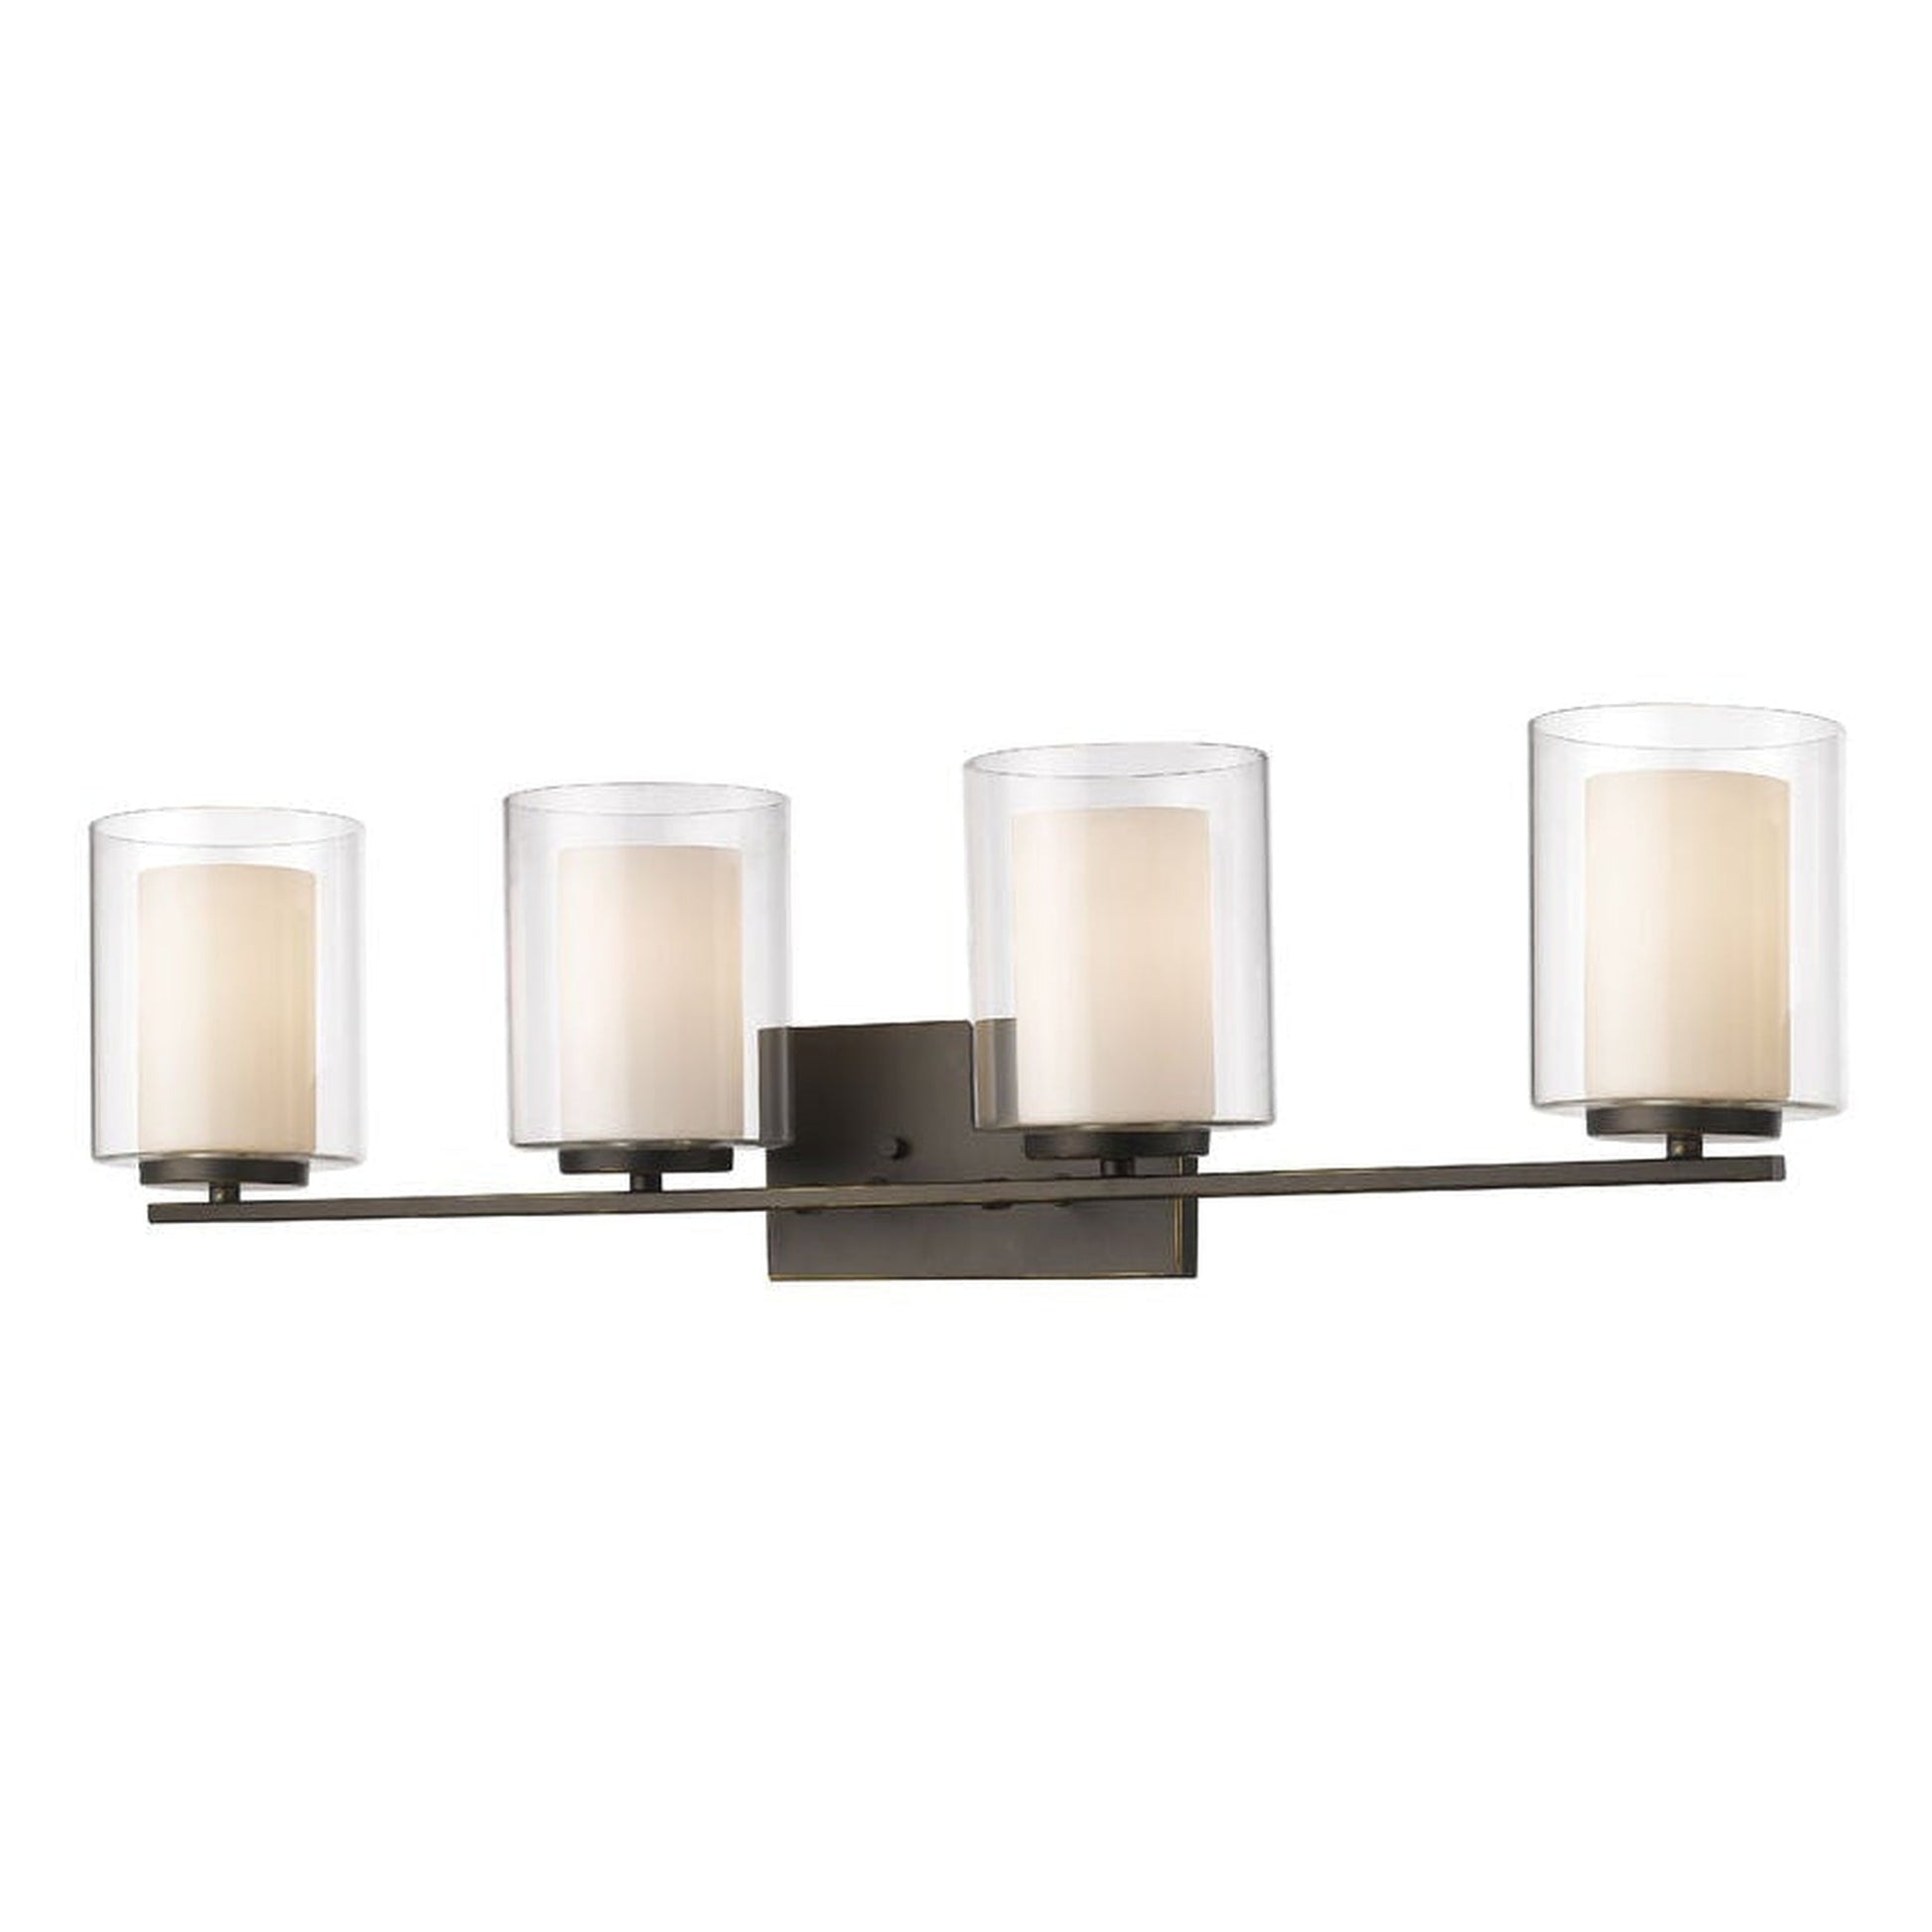 Z-Lite Willow 32" 4-Light Olde Bronze Vanity Light With Clear and Matte Opal Glass Shade